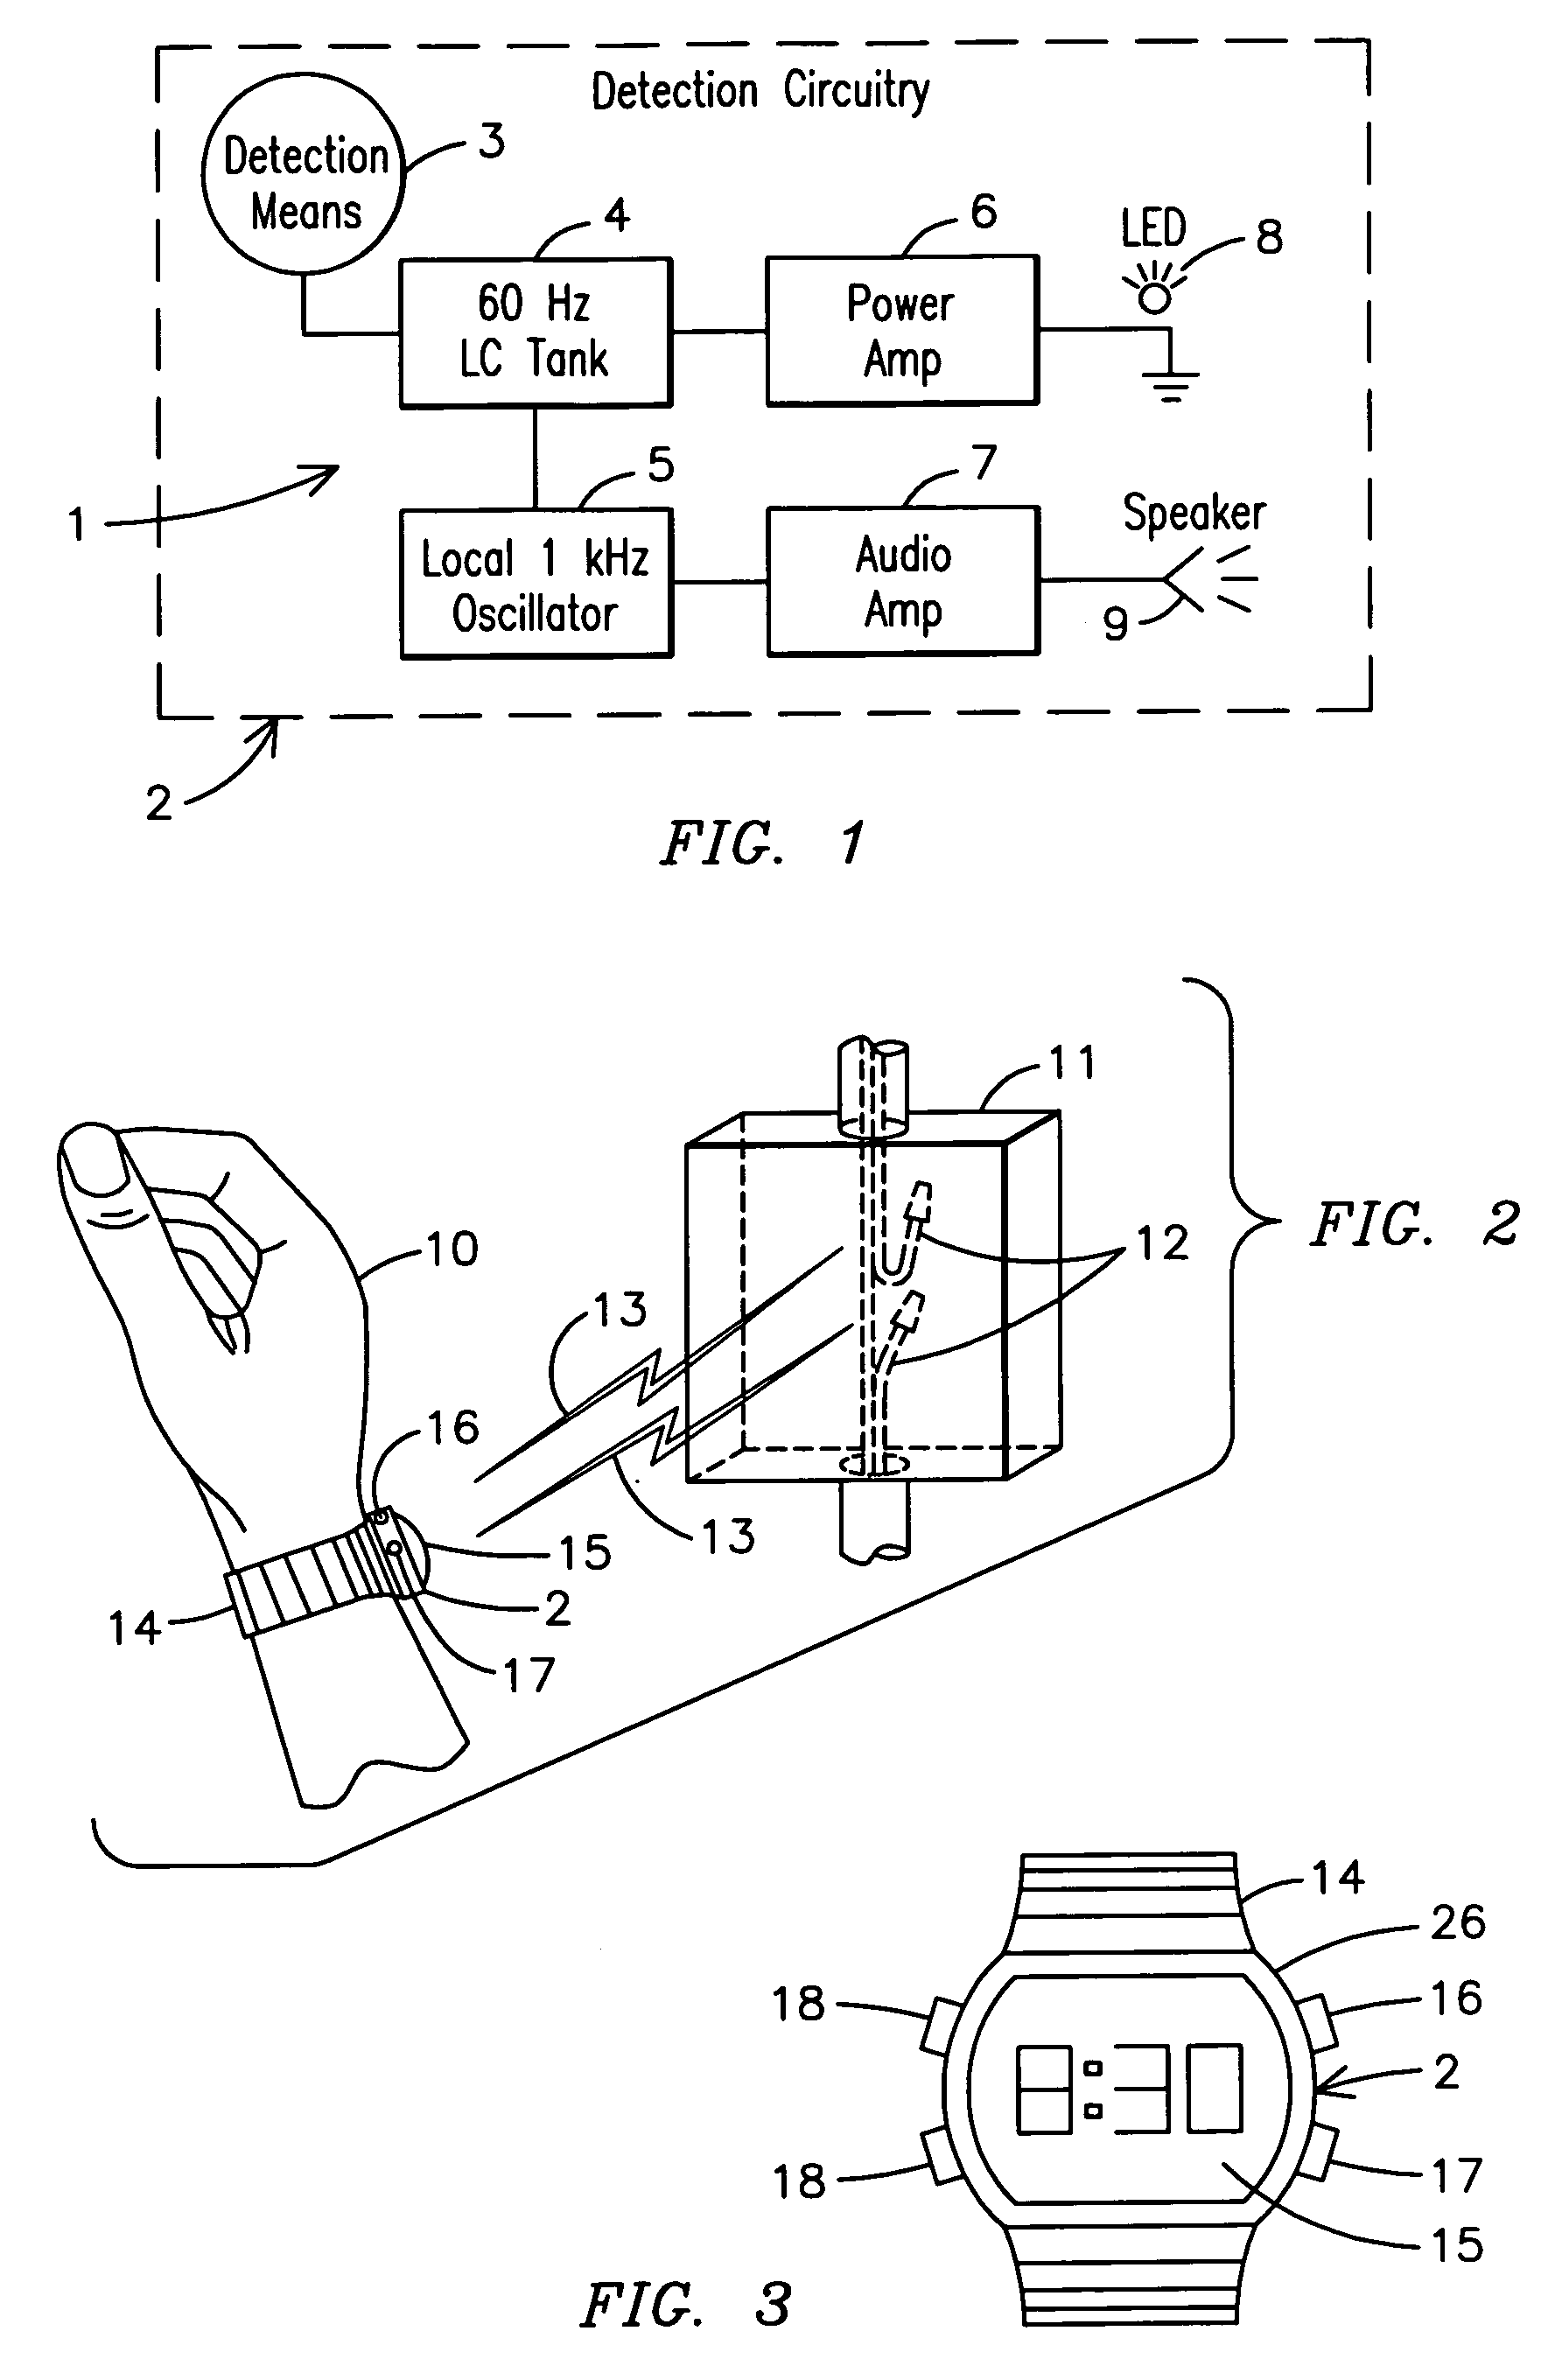 Wrist-wearable electrical detection device